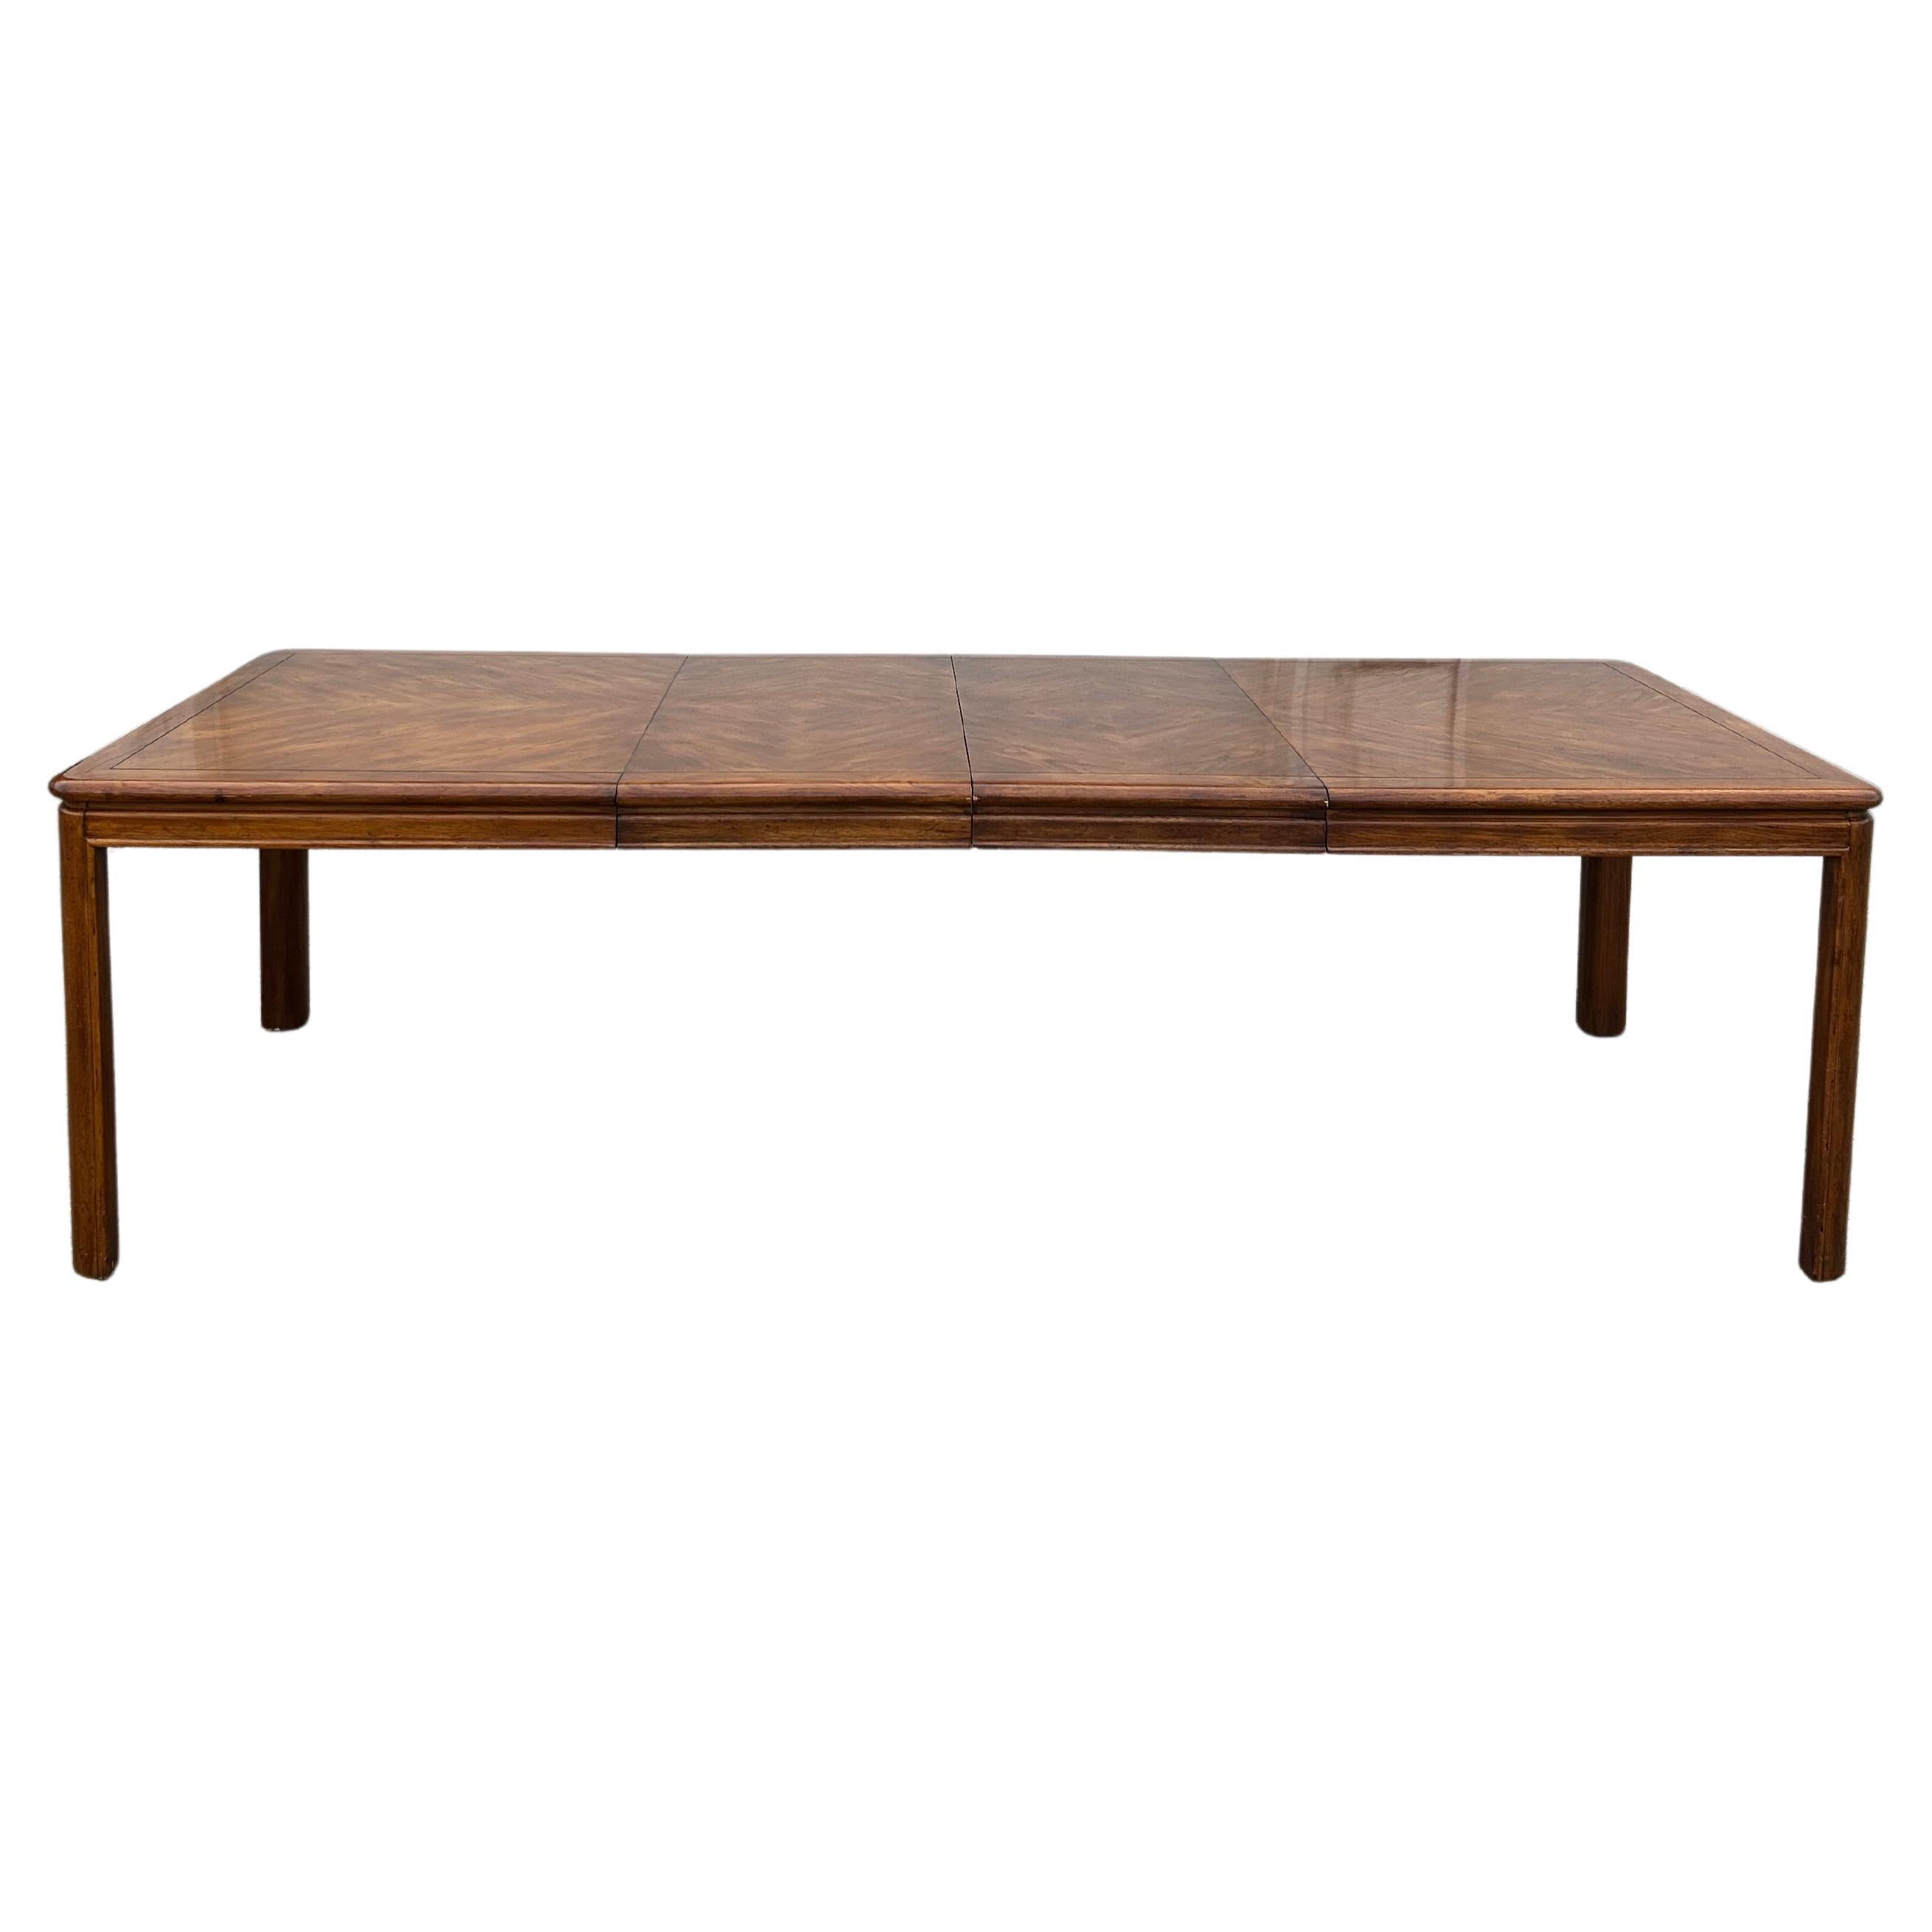 Drexel Passage Dining Table w/ Two Leaves